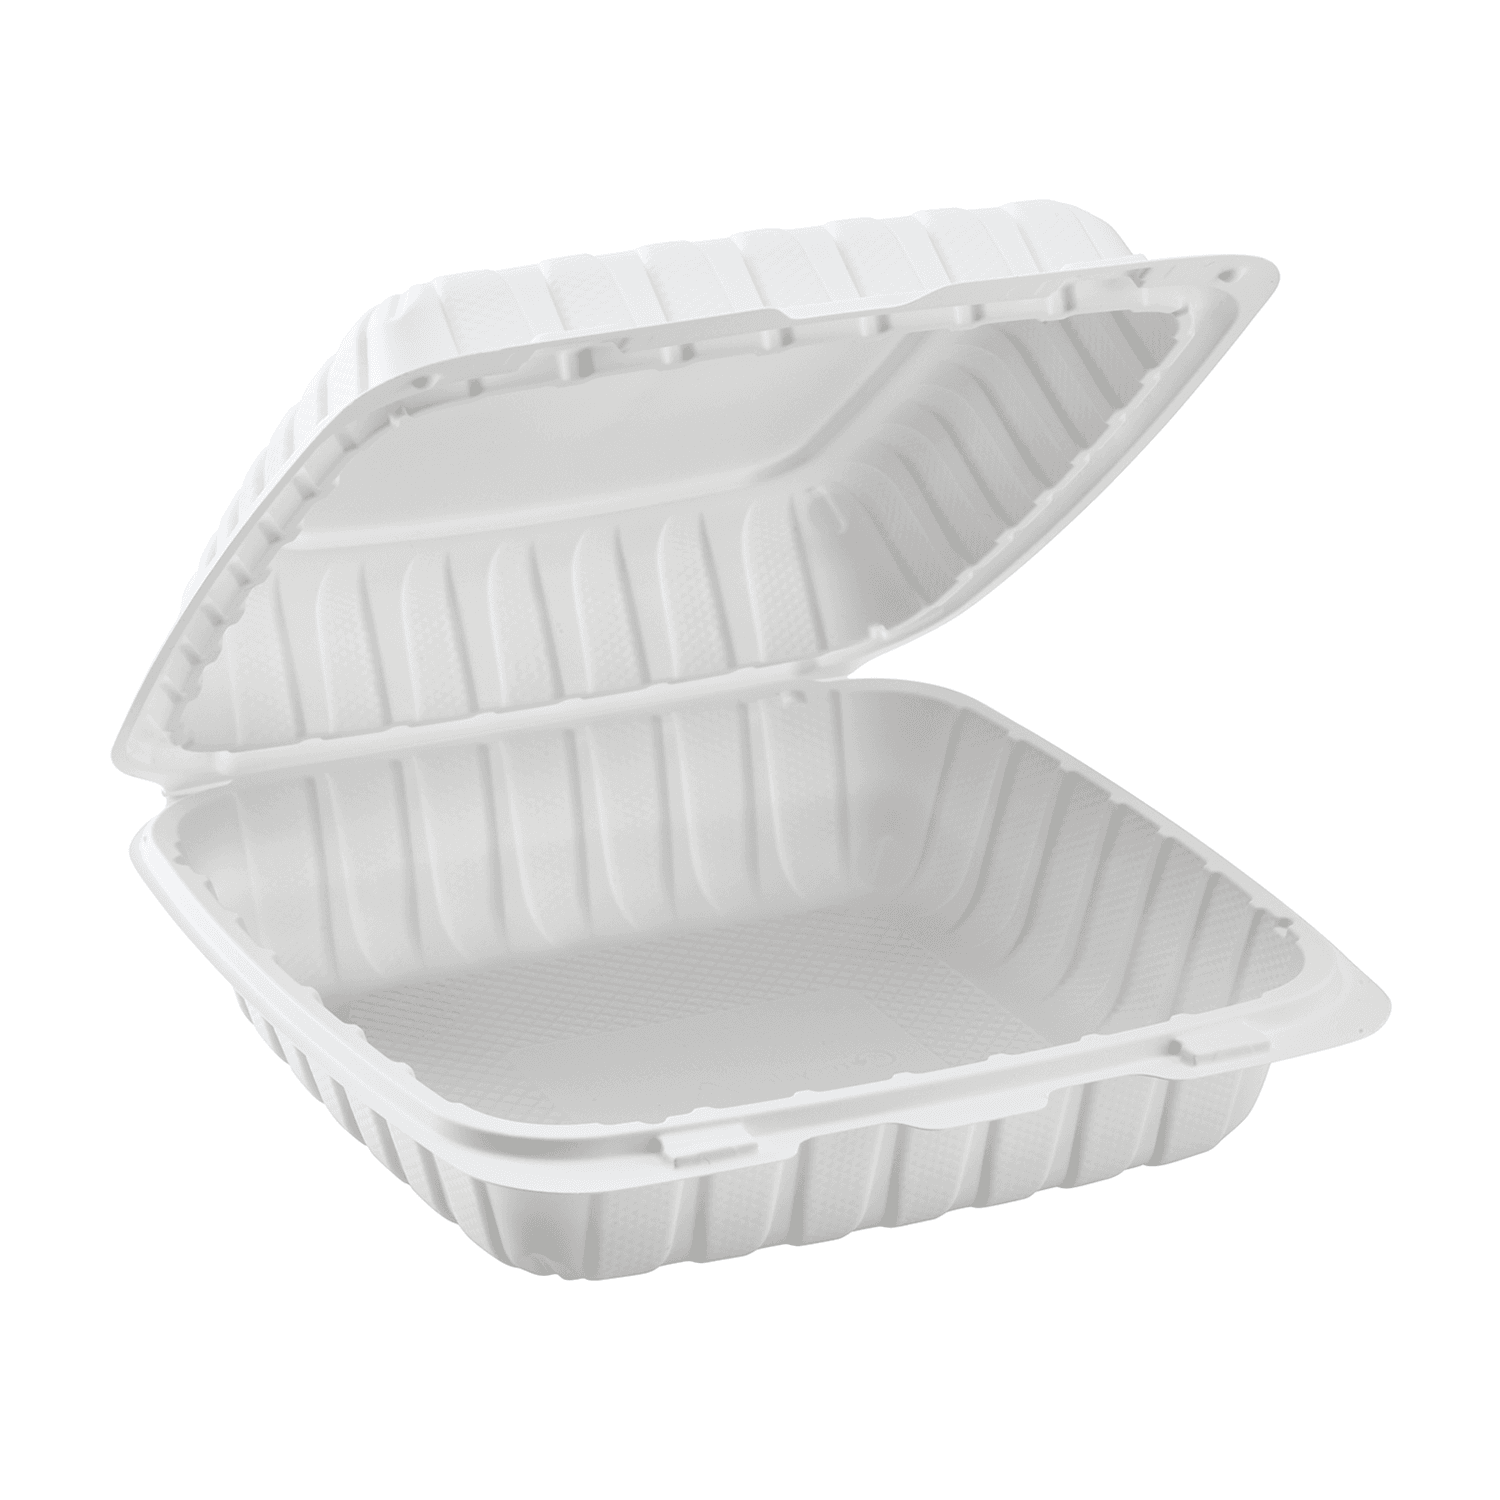 Karat Earth 9" x 9" Mineral Filled PP Hinged Container, White - 120 pcs